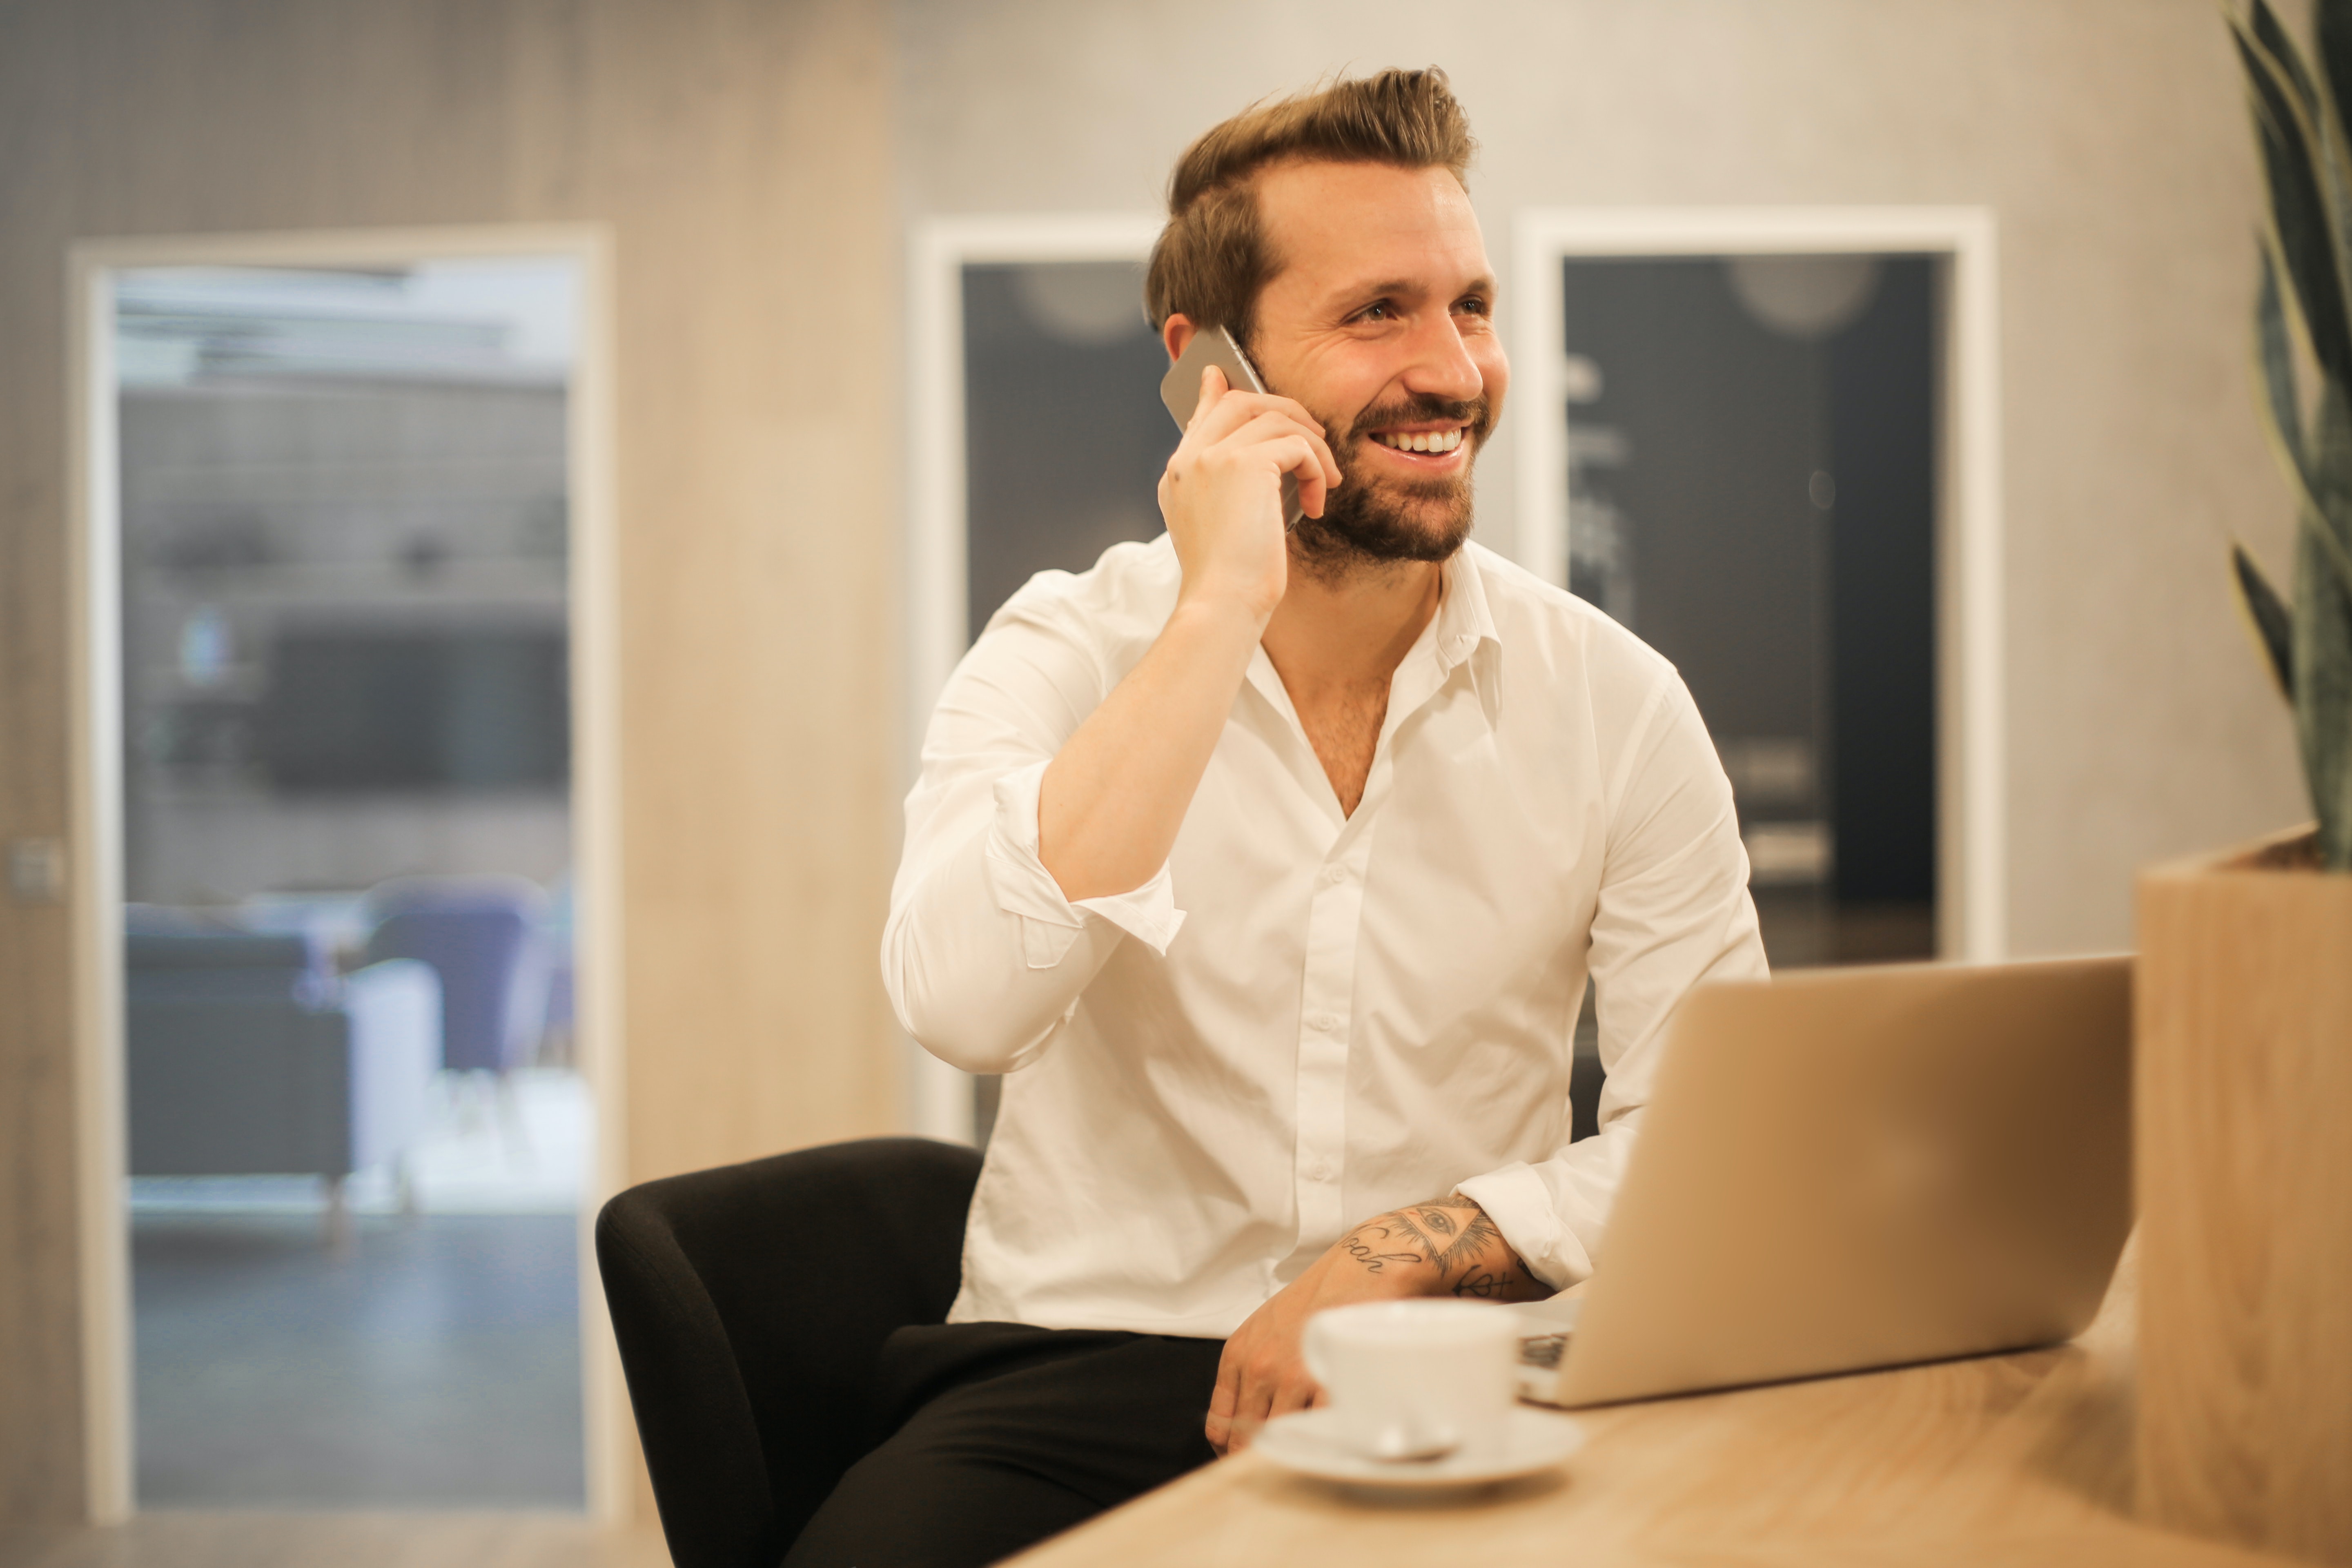 Top Tips – Preparing For Telephone Interviews